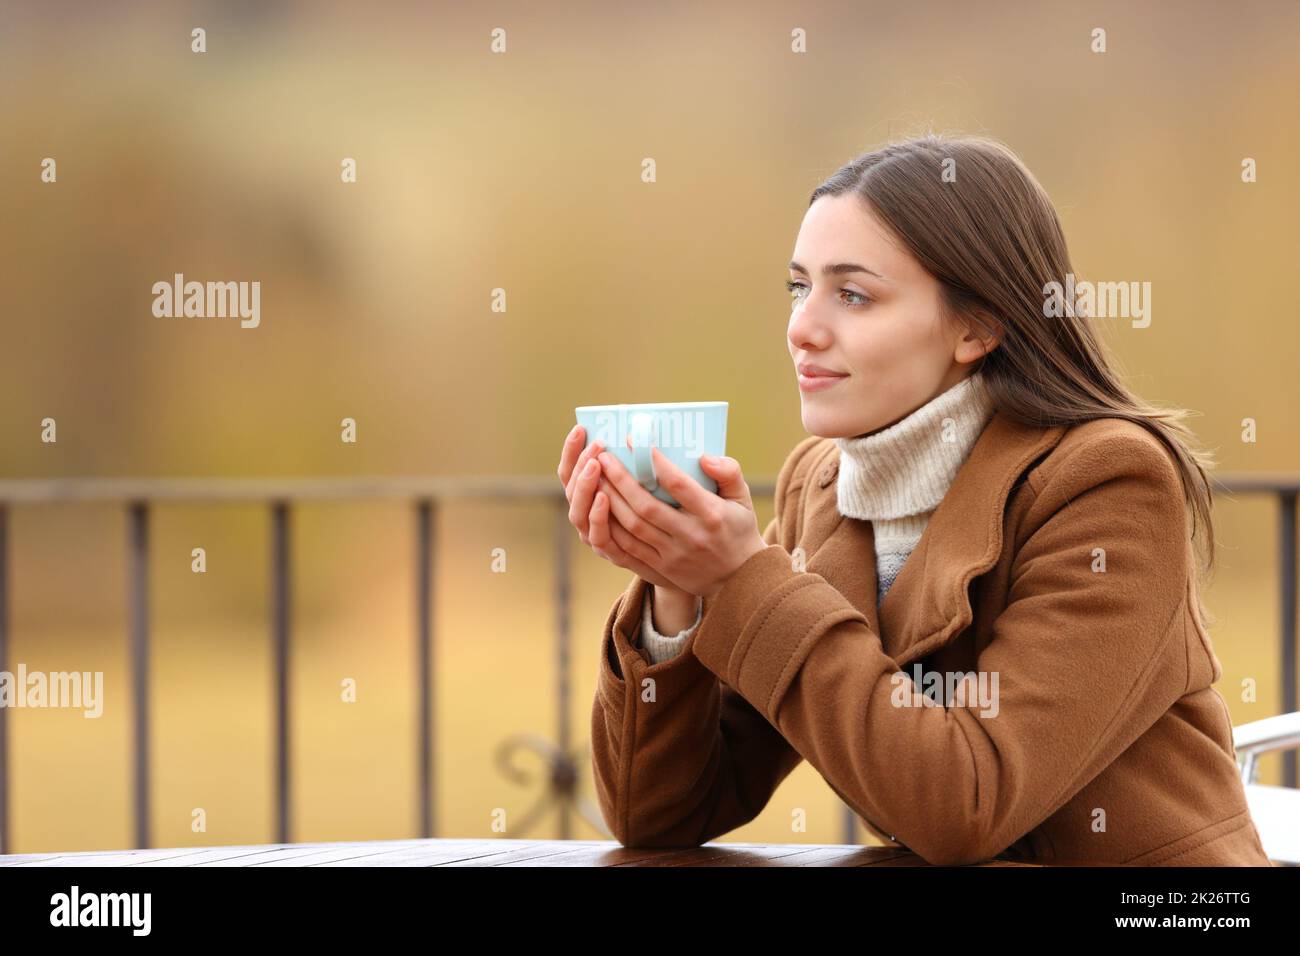 Relaxed woman contemplating drinking in a terrace Stock Photo